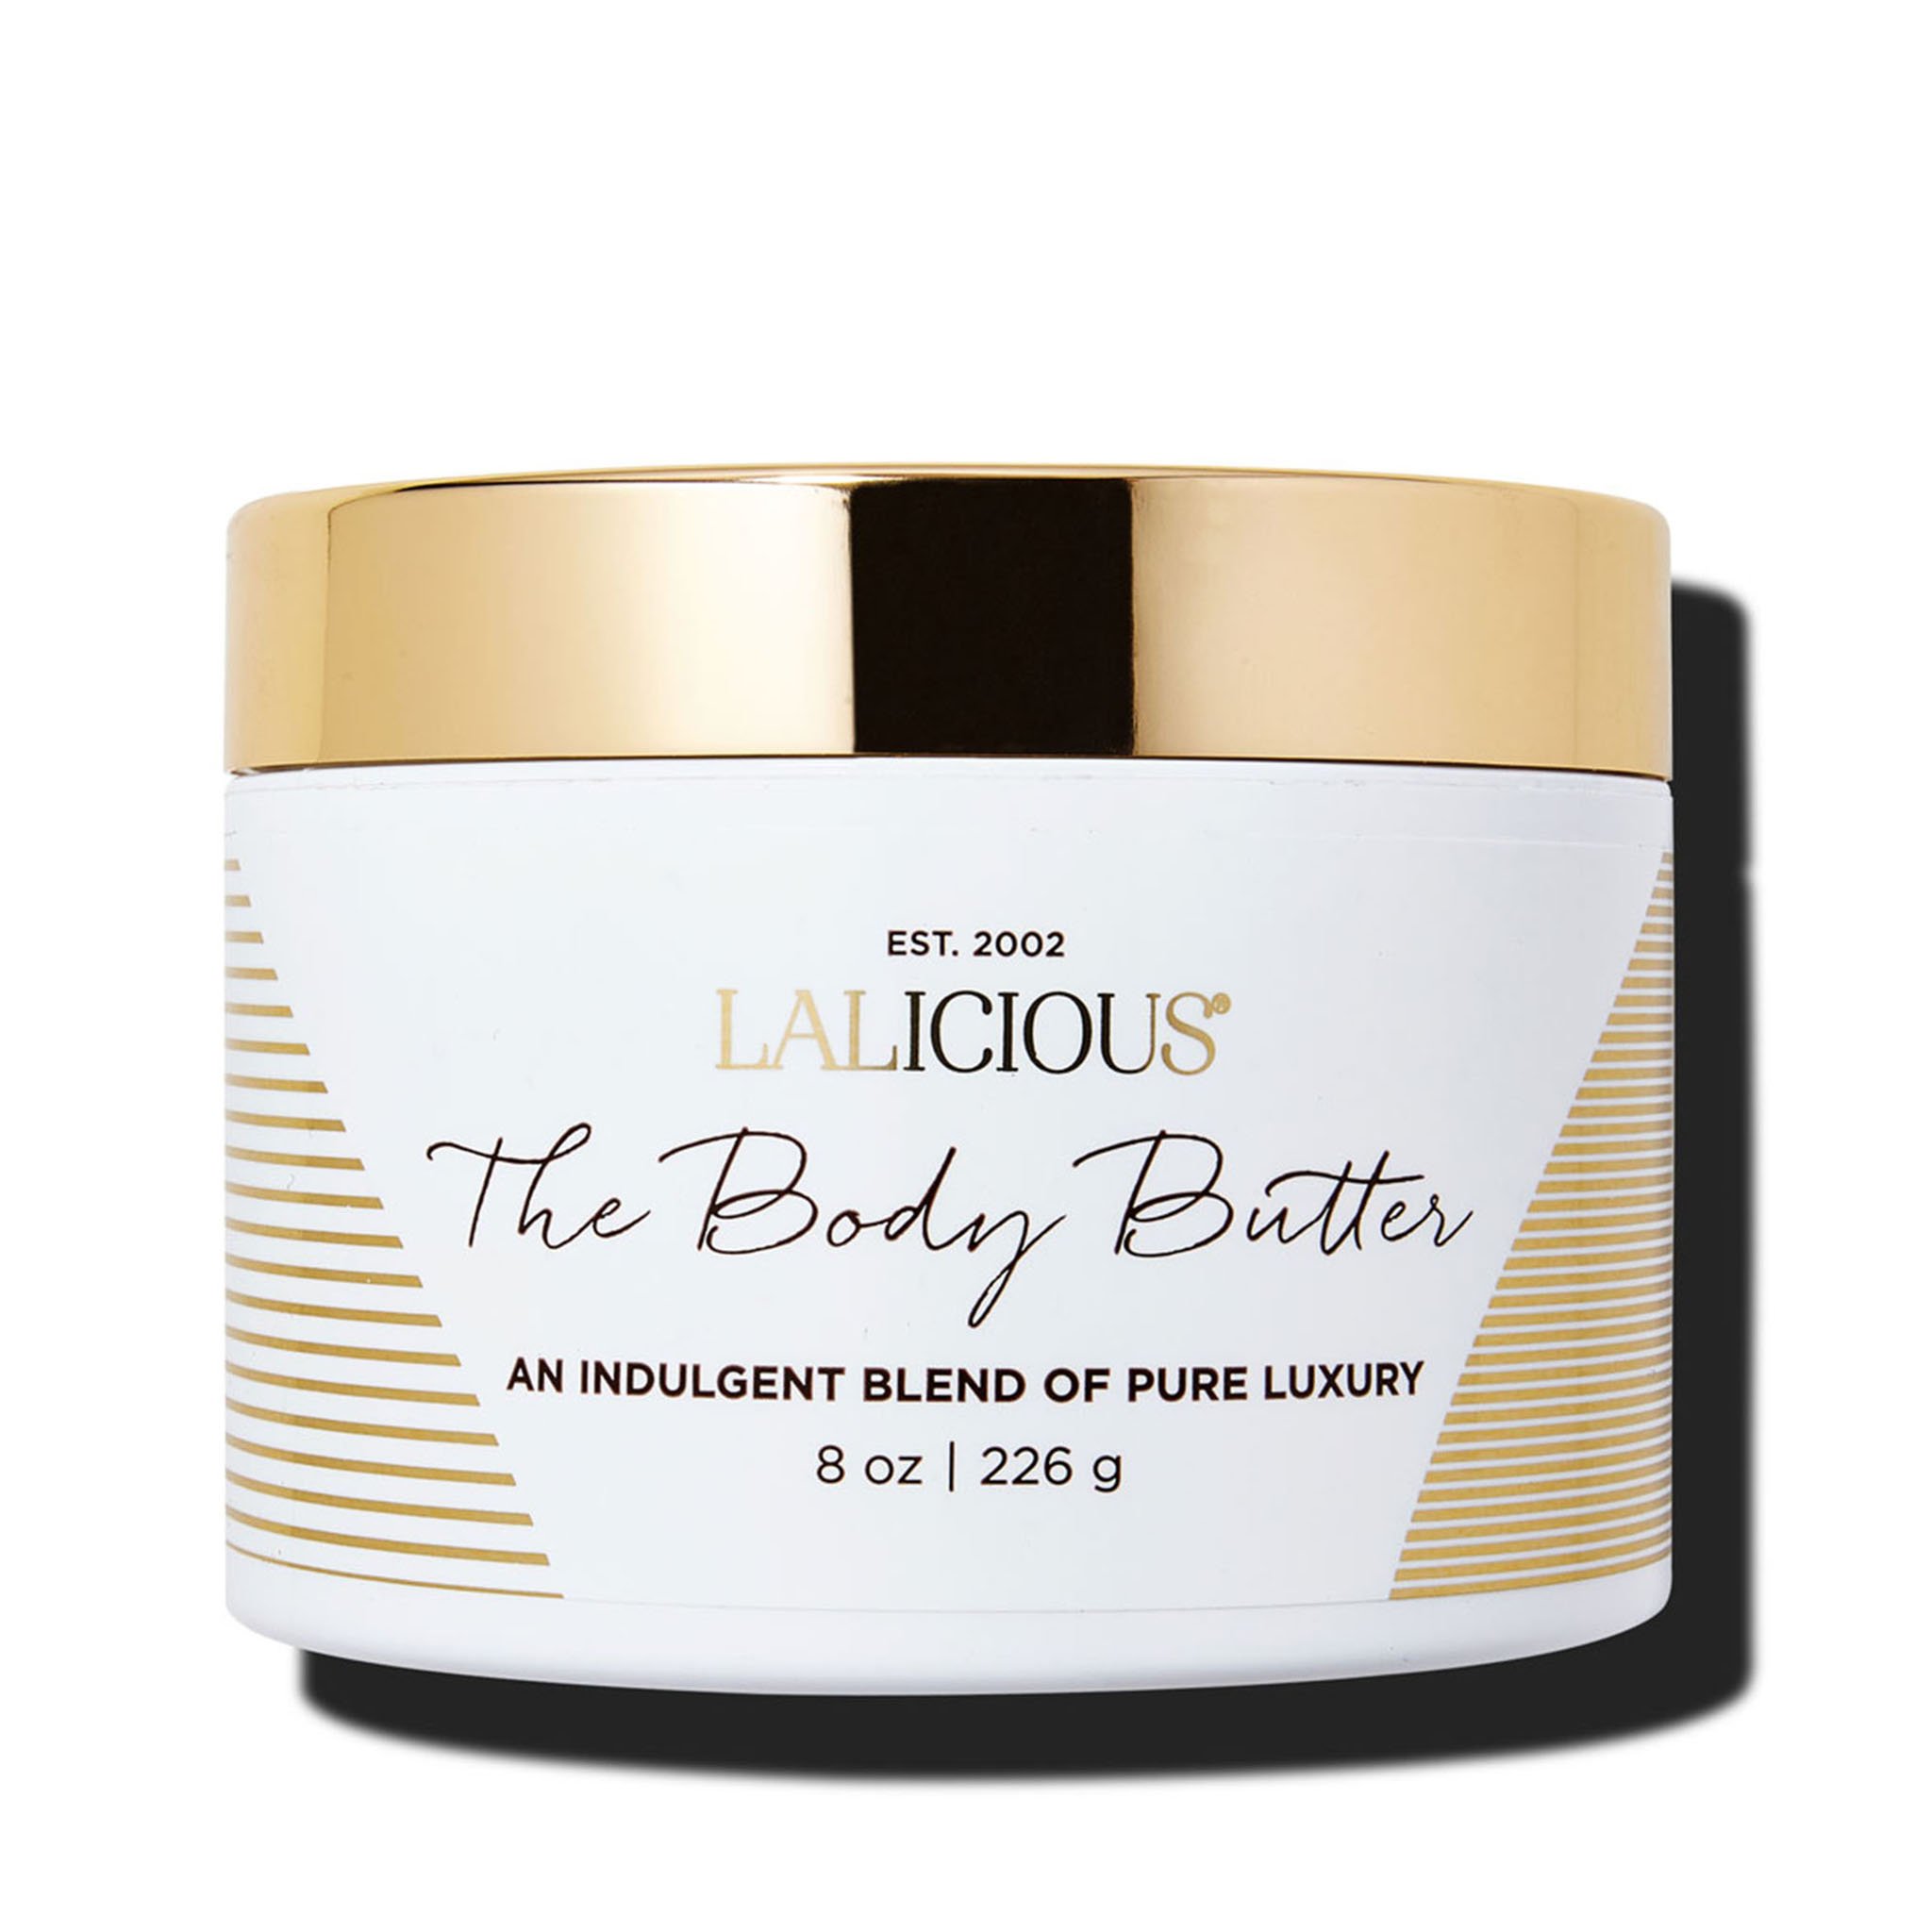 The Body Butter